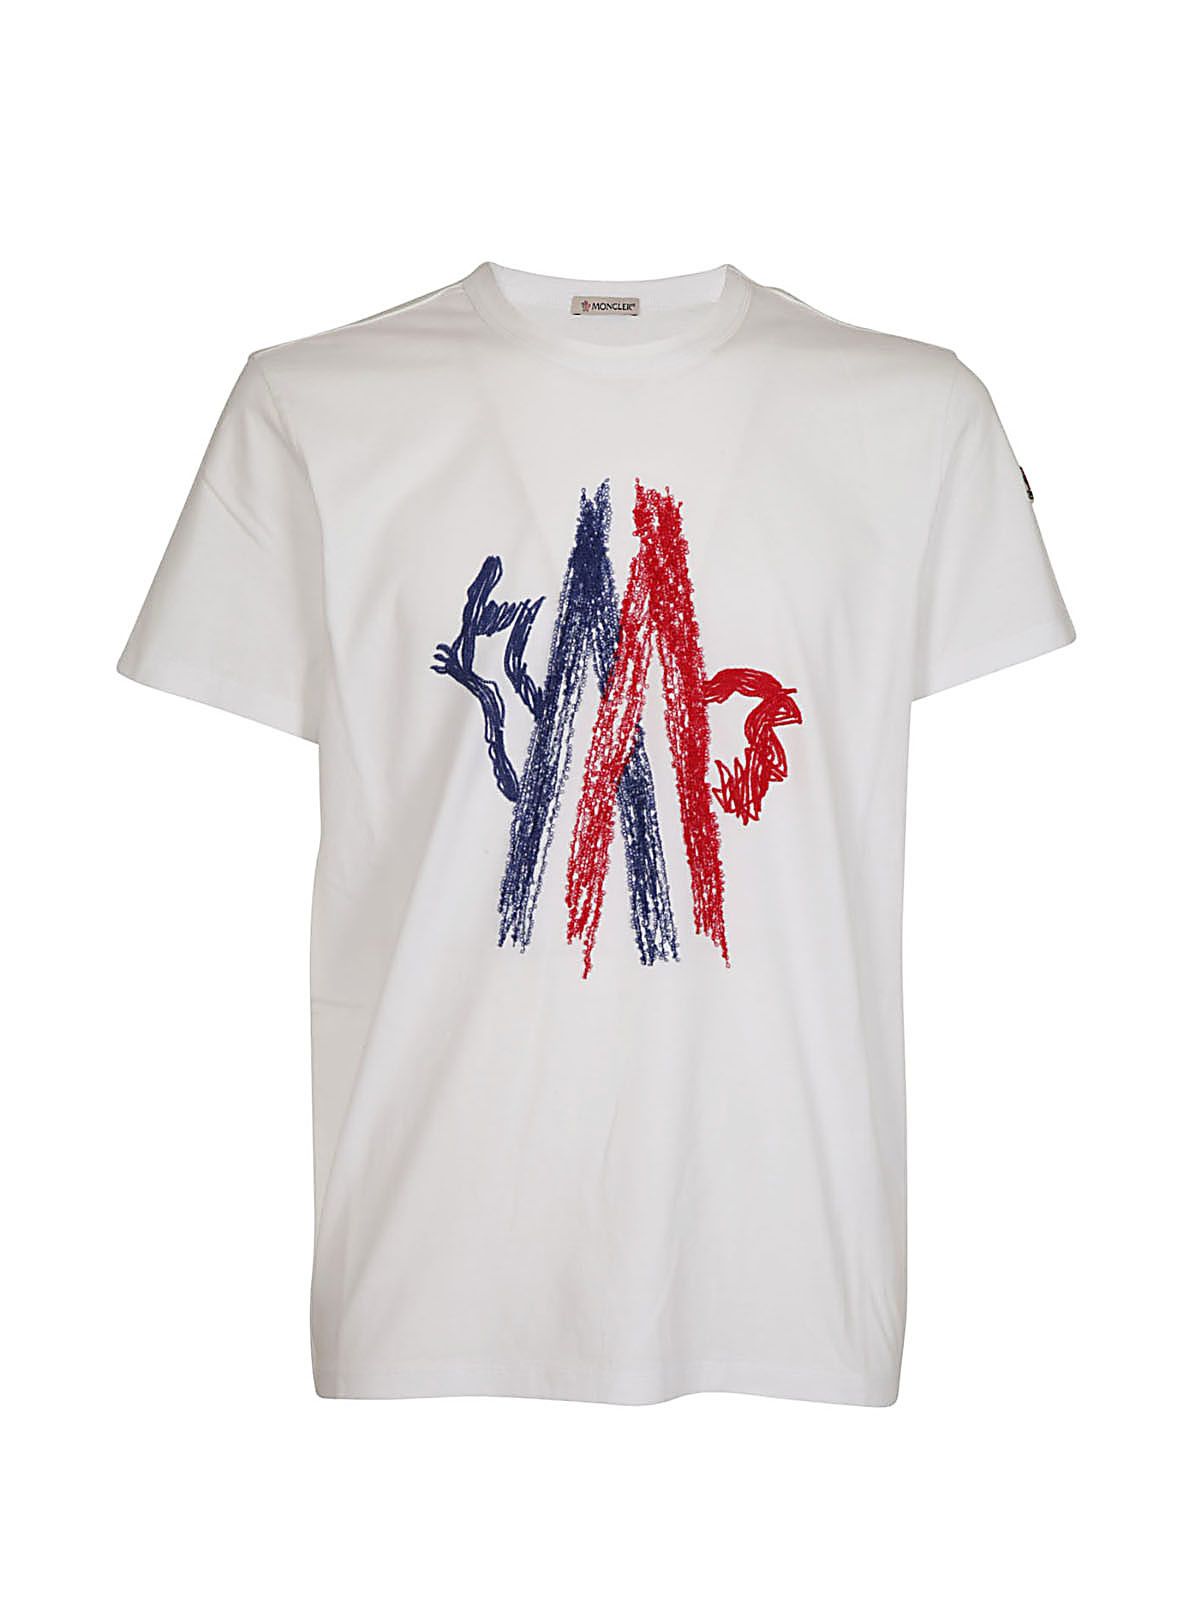 Moncler Embroidered Mountain Logo Crewneck T-Shirt, White/Red/Blue In